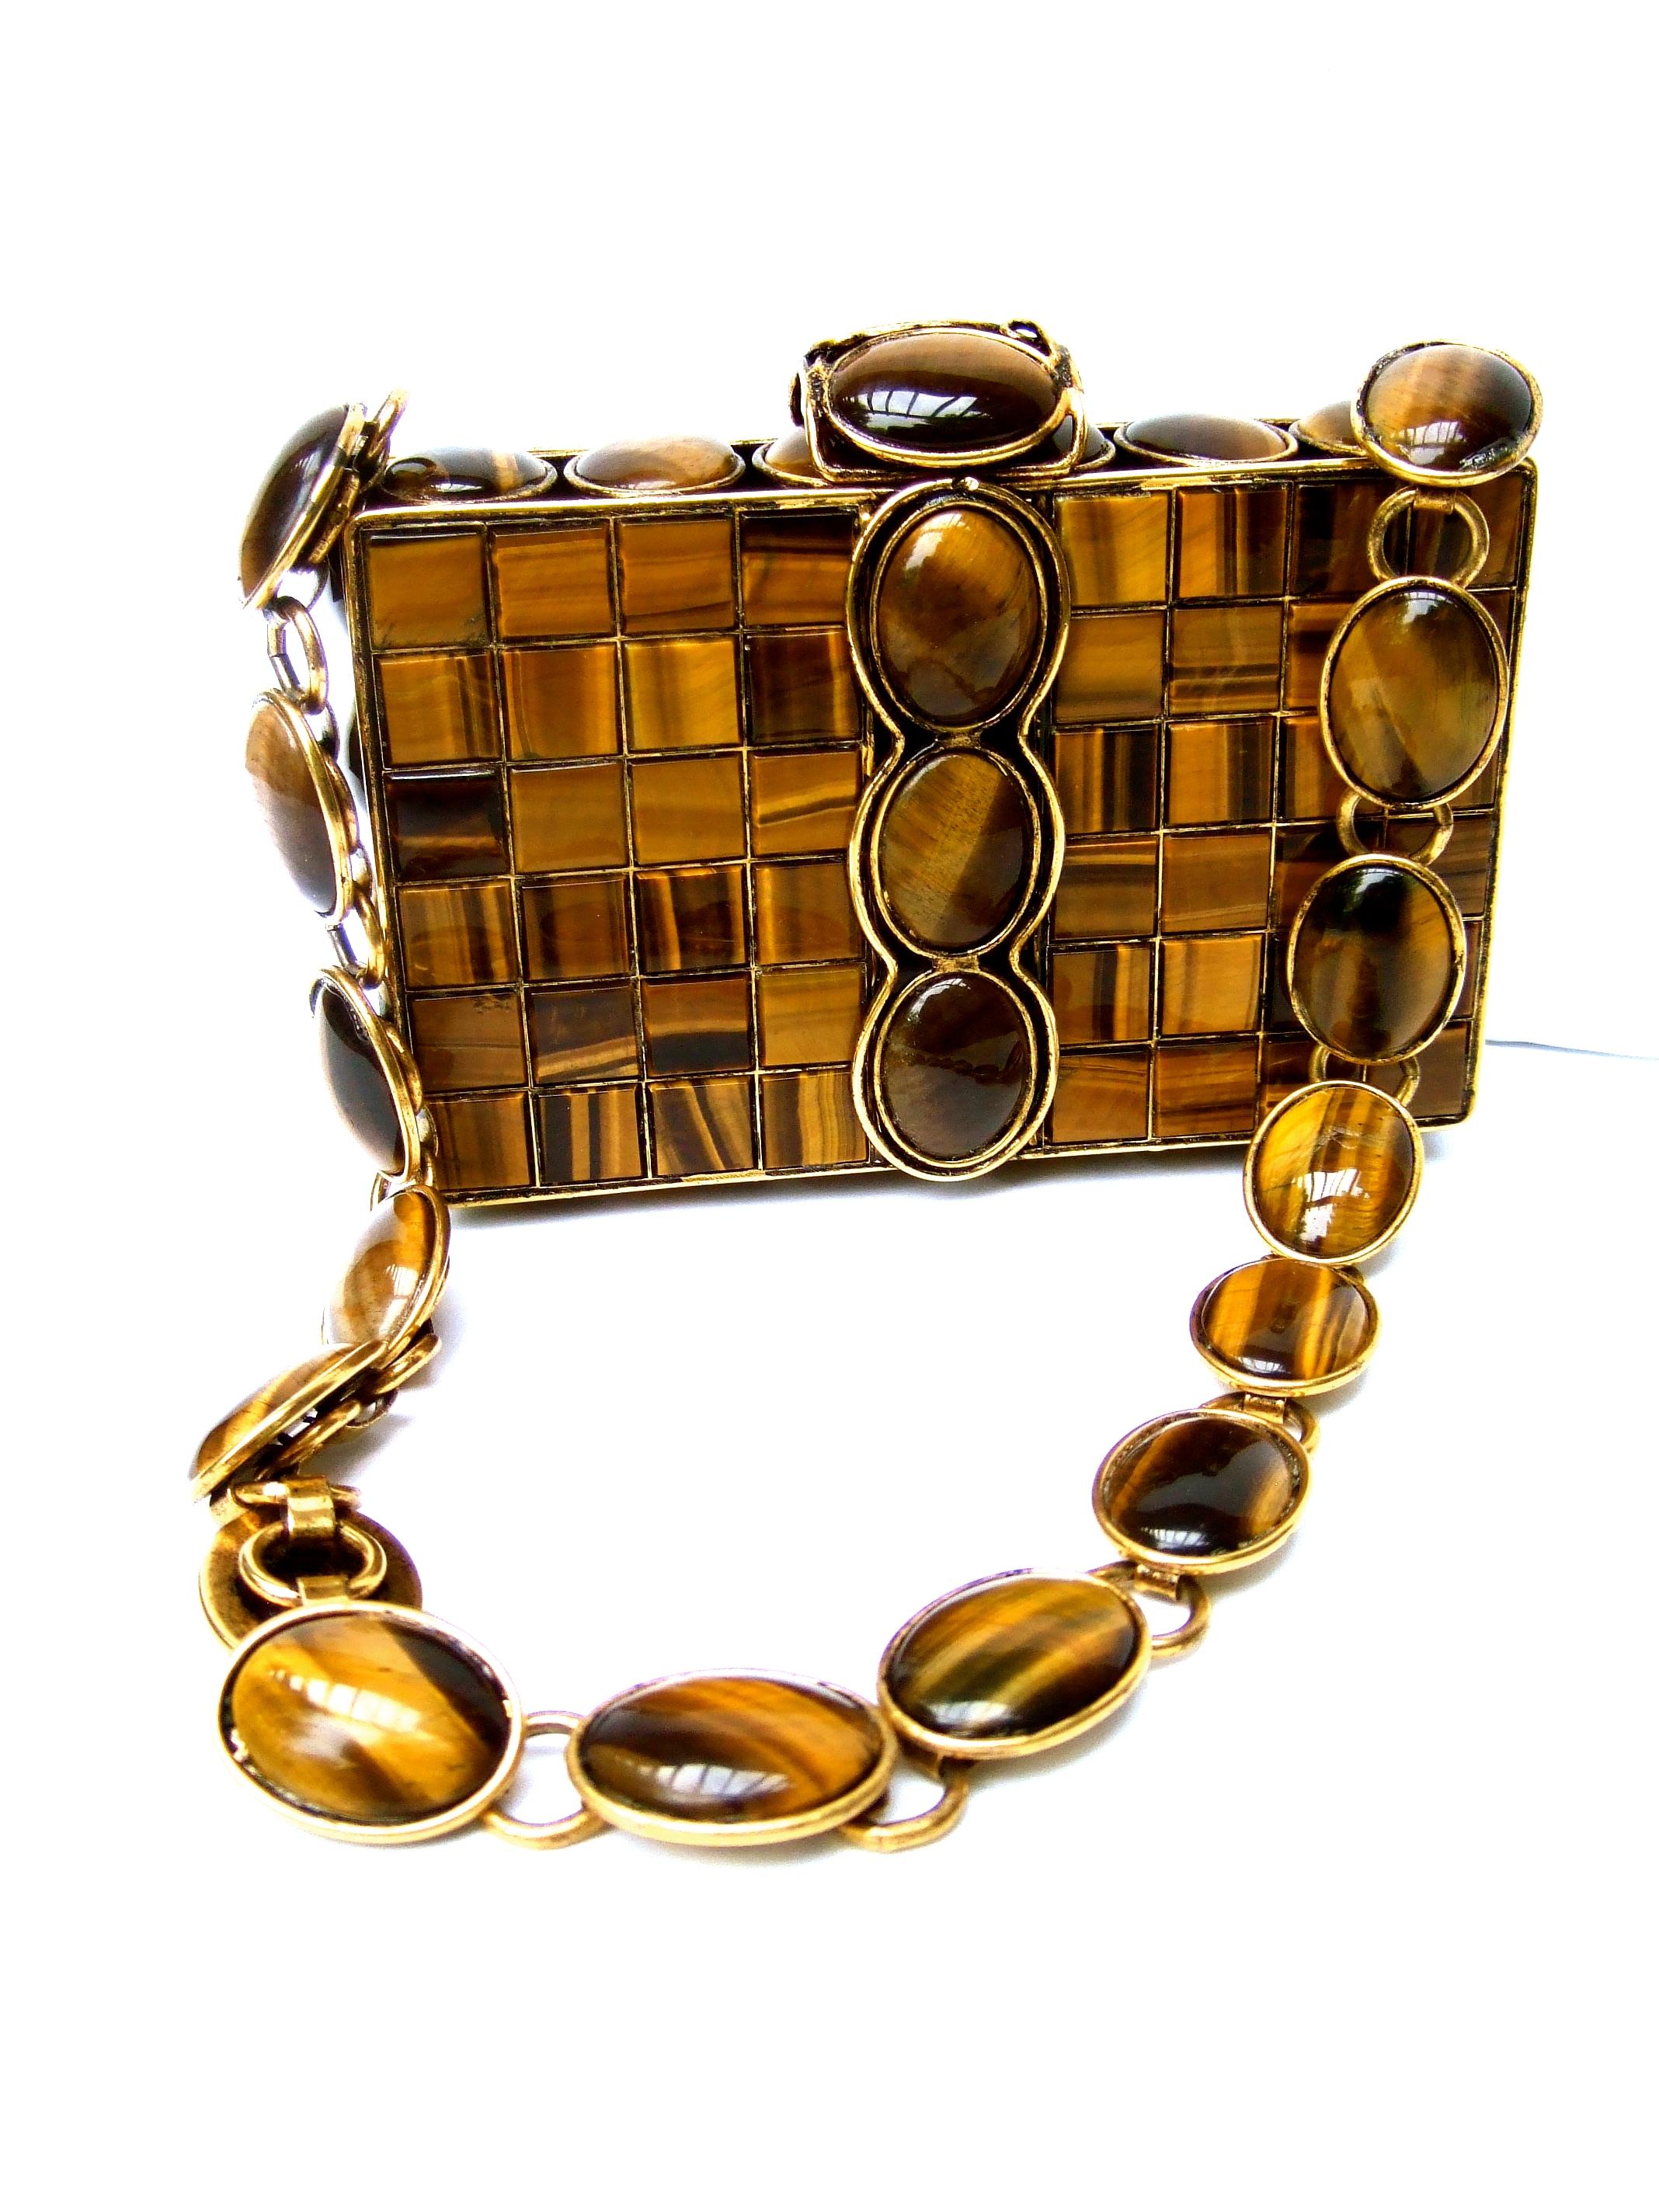 IRADJ MOINI Exquisite handmade artisan semi-precious tiger eye evening bag 
The opulent shoulder bag is embellished with rows of handset square tiger eye tiles
on the front & back exterior panels 

Juxtaposed with a band of larger oval shaped